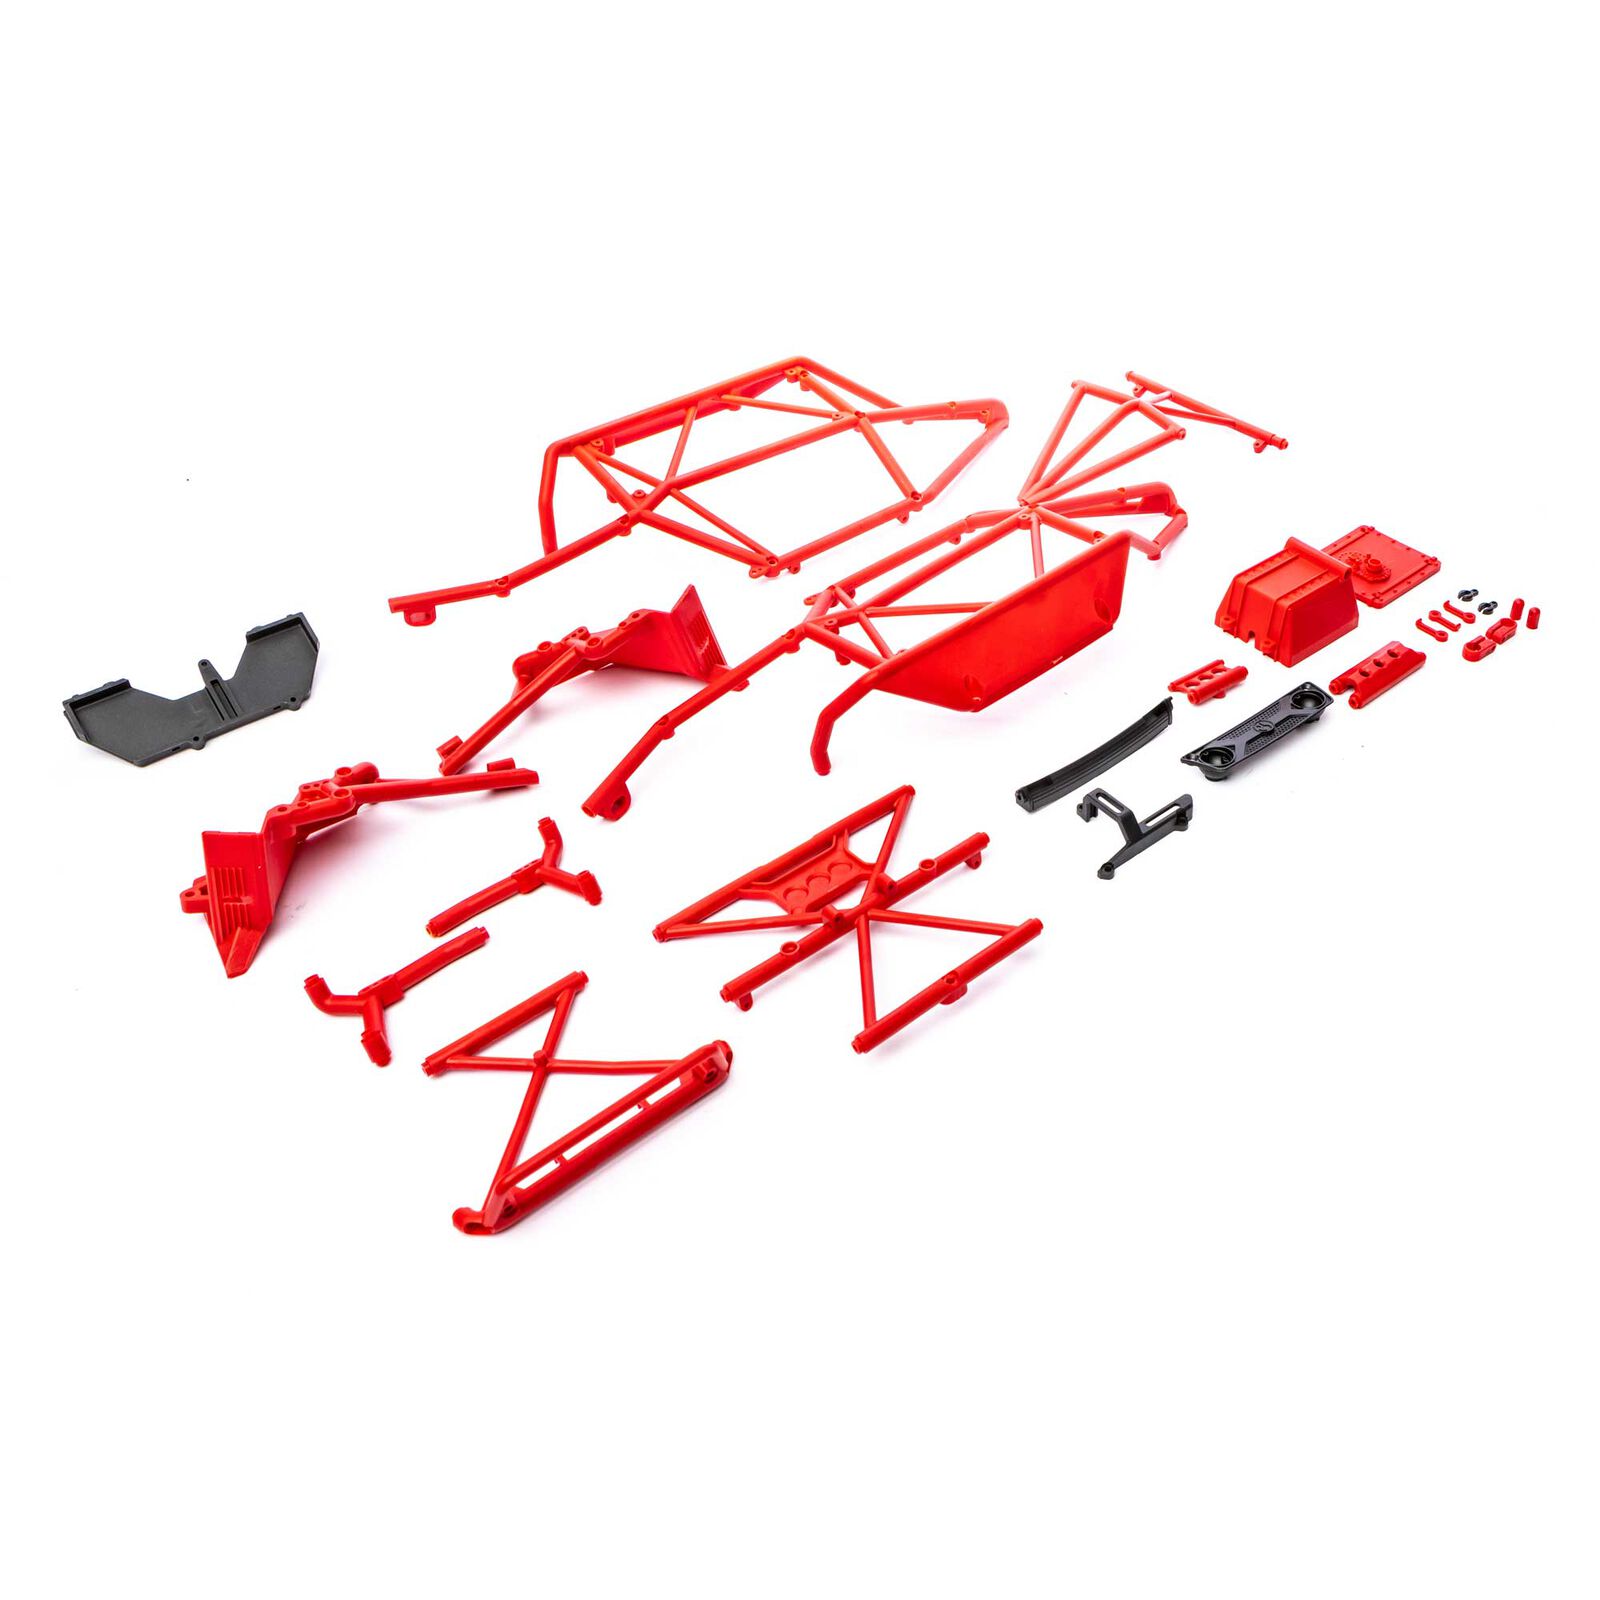 AXIAL Cage Set, Complete, Red: Capra 4WS UTB